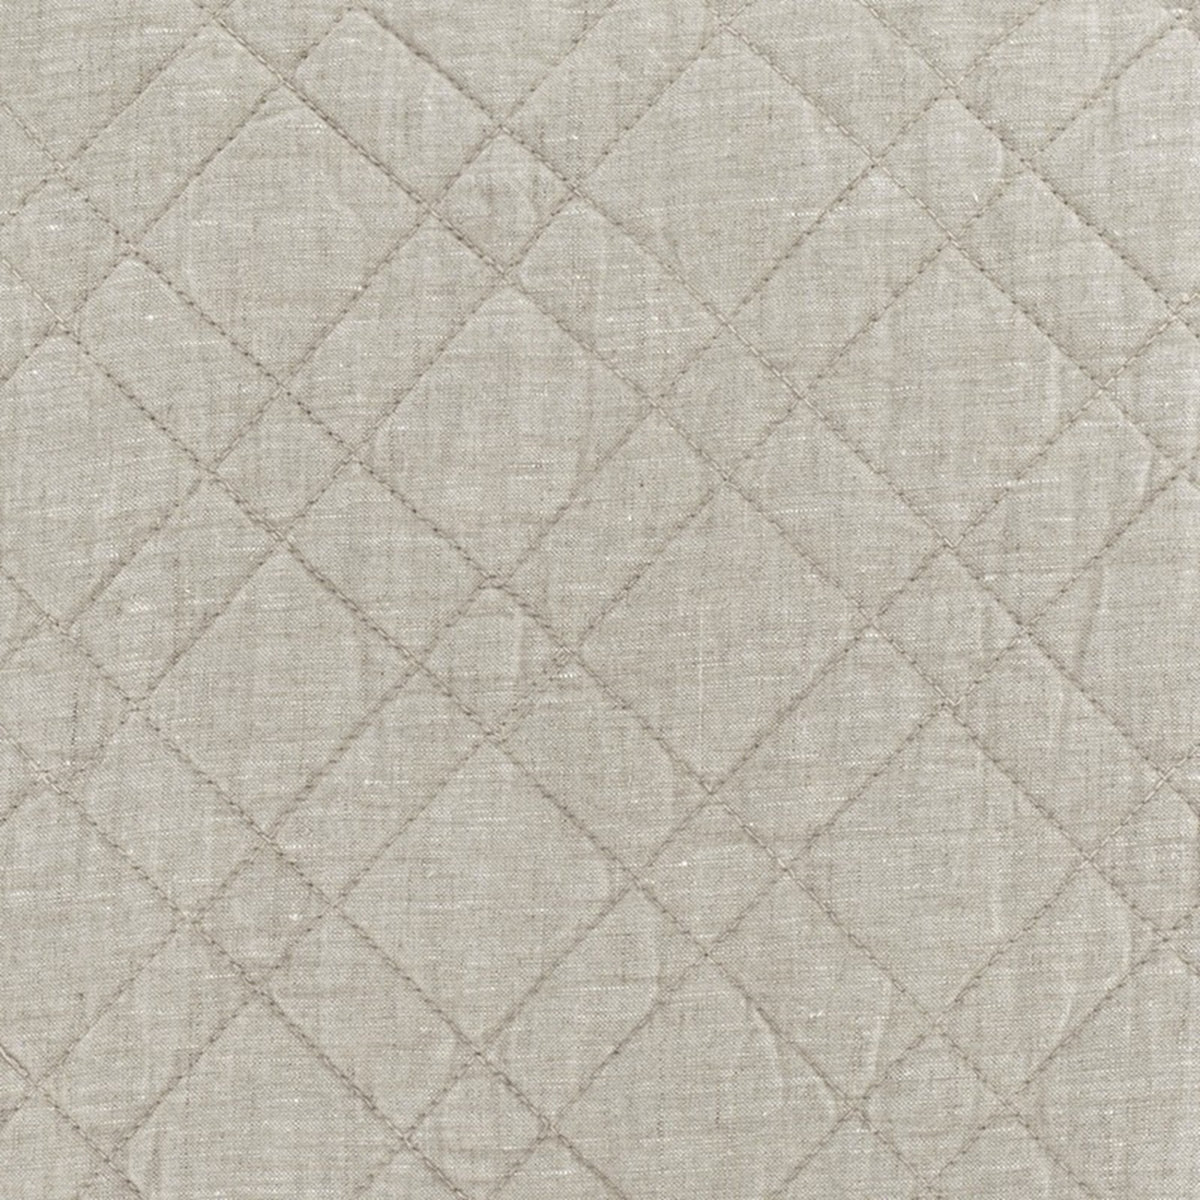 Swatch Sample of Pine Cone Hill Washed Linen Quilted Bedding in Natural Color 